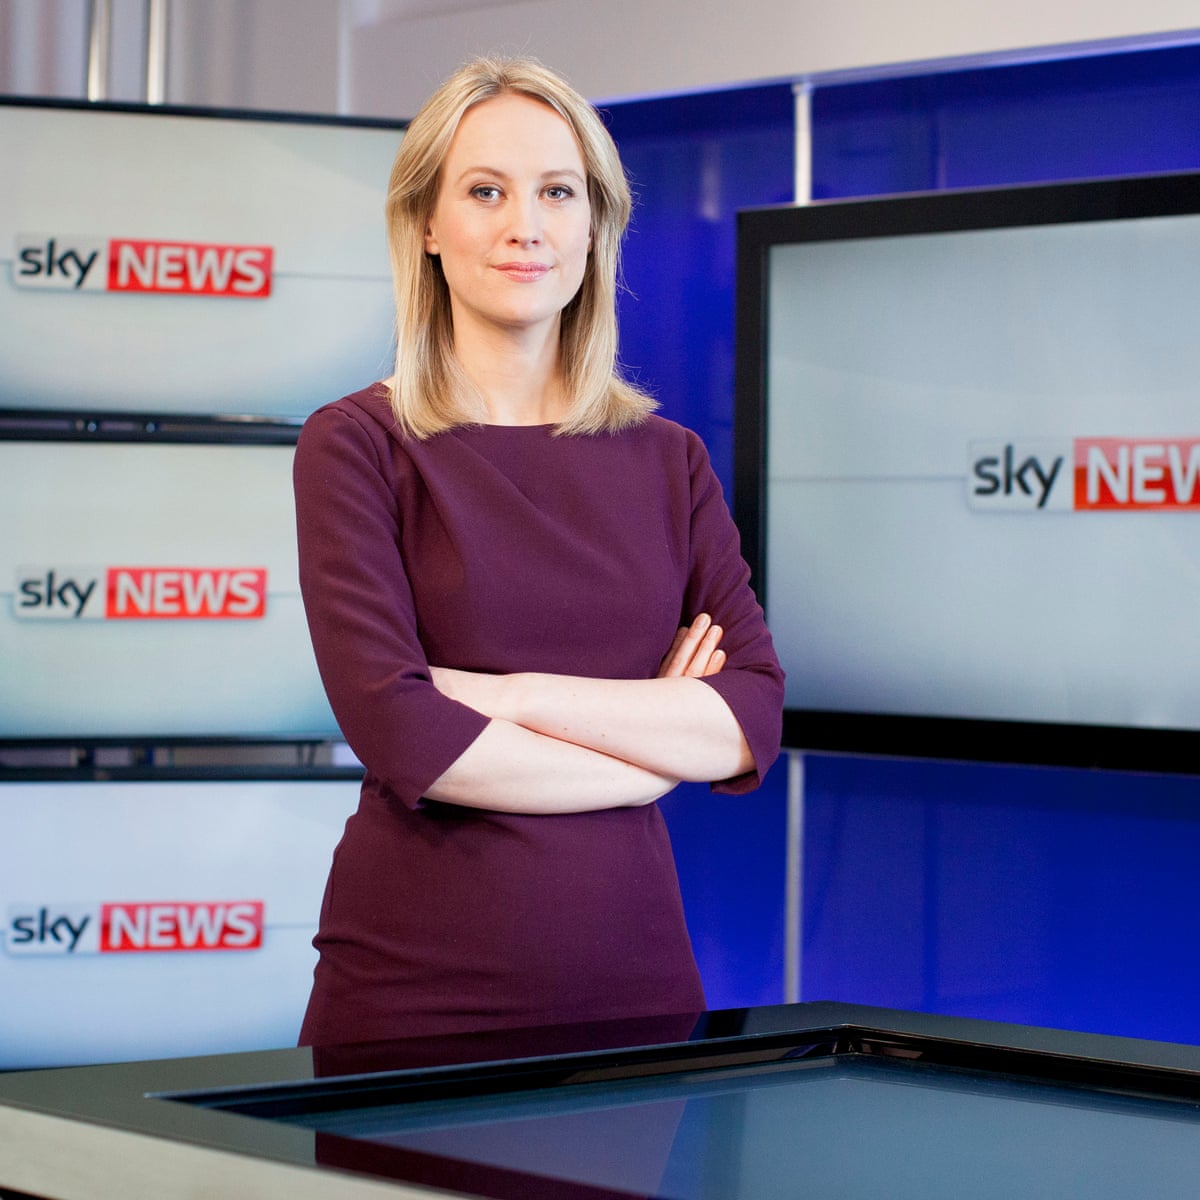 sky new presenter SAY UK HUMANS GET DRUNK NO WORK TRUE see how silly sky news is S RICH,